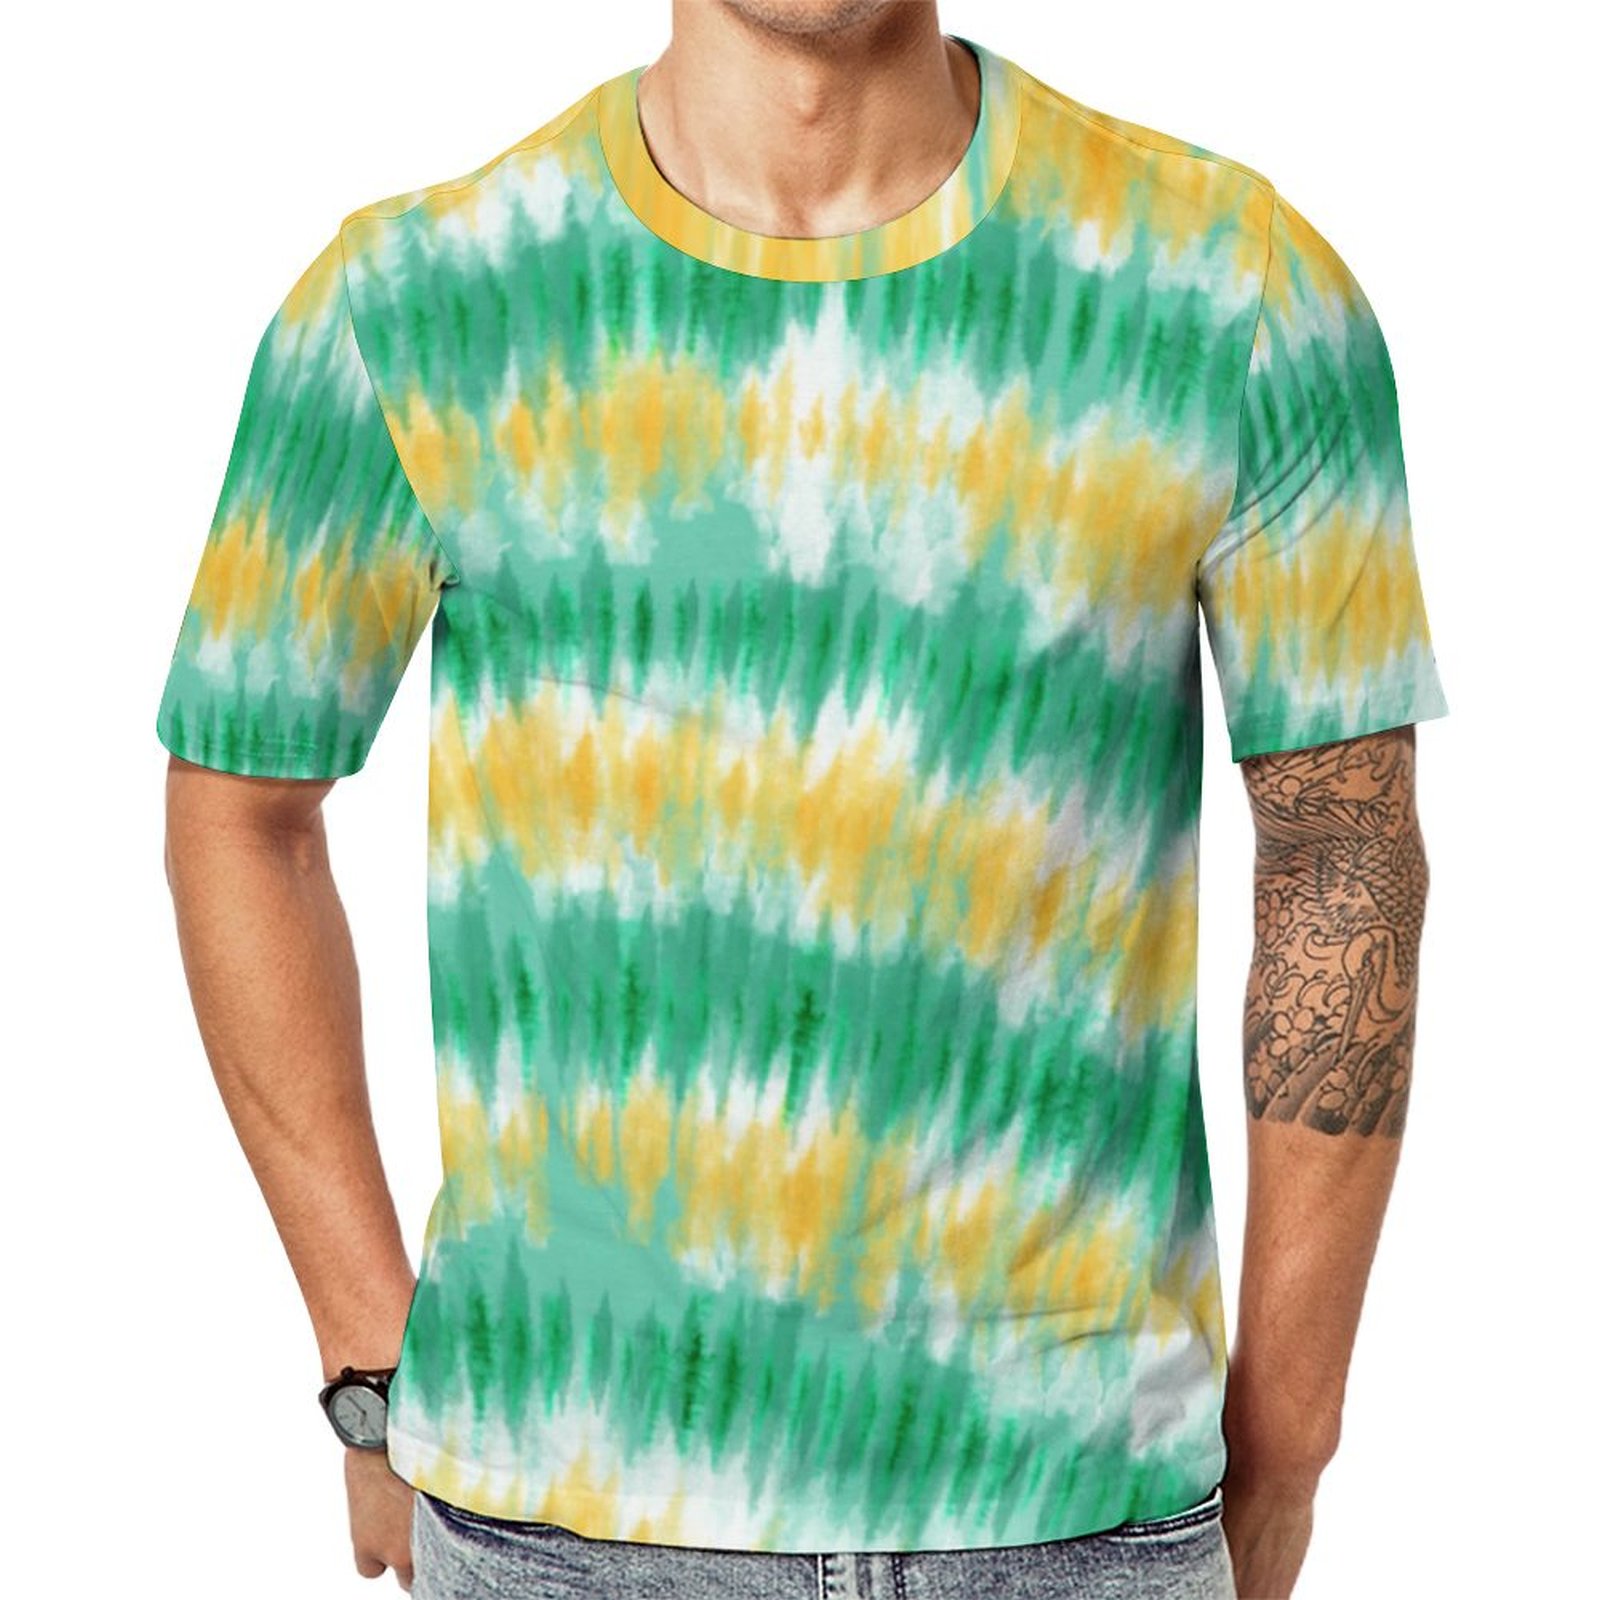 Green Yellow Wave Tie Dye Short Sleeve Print Unisex Tshirt Summer Casual Tees for Men and Women Coolcoshirts